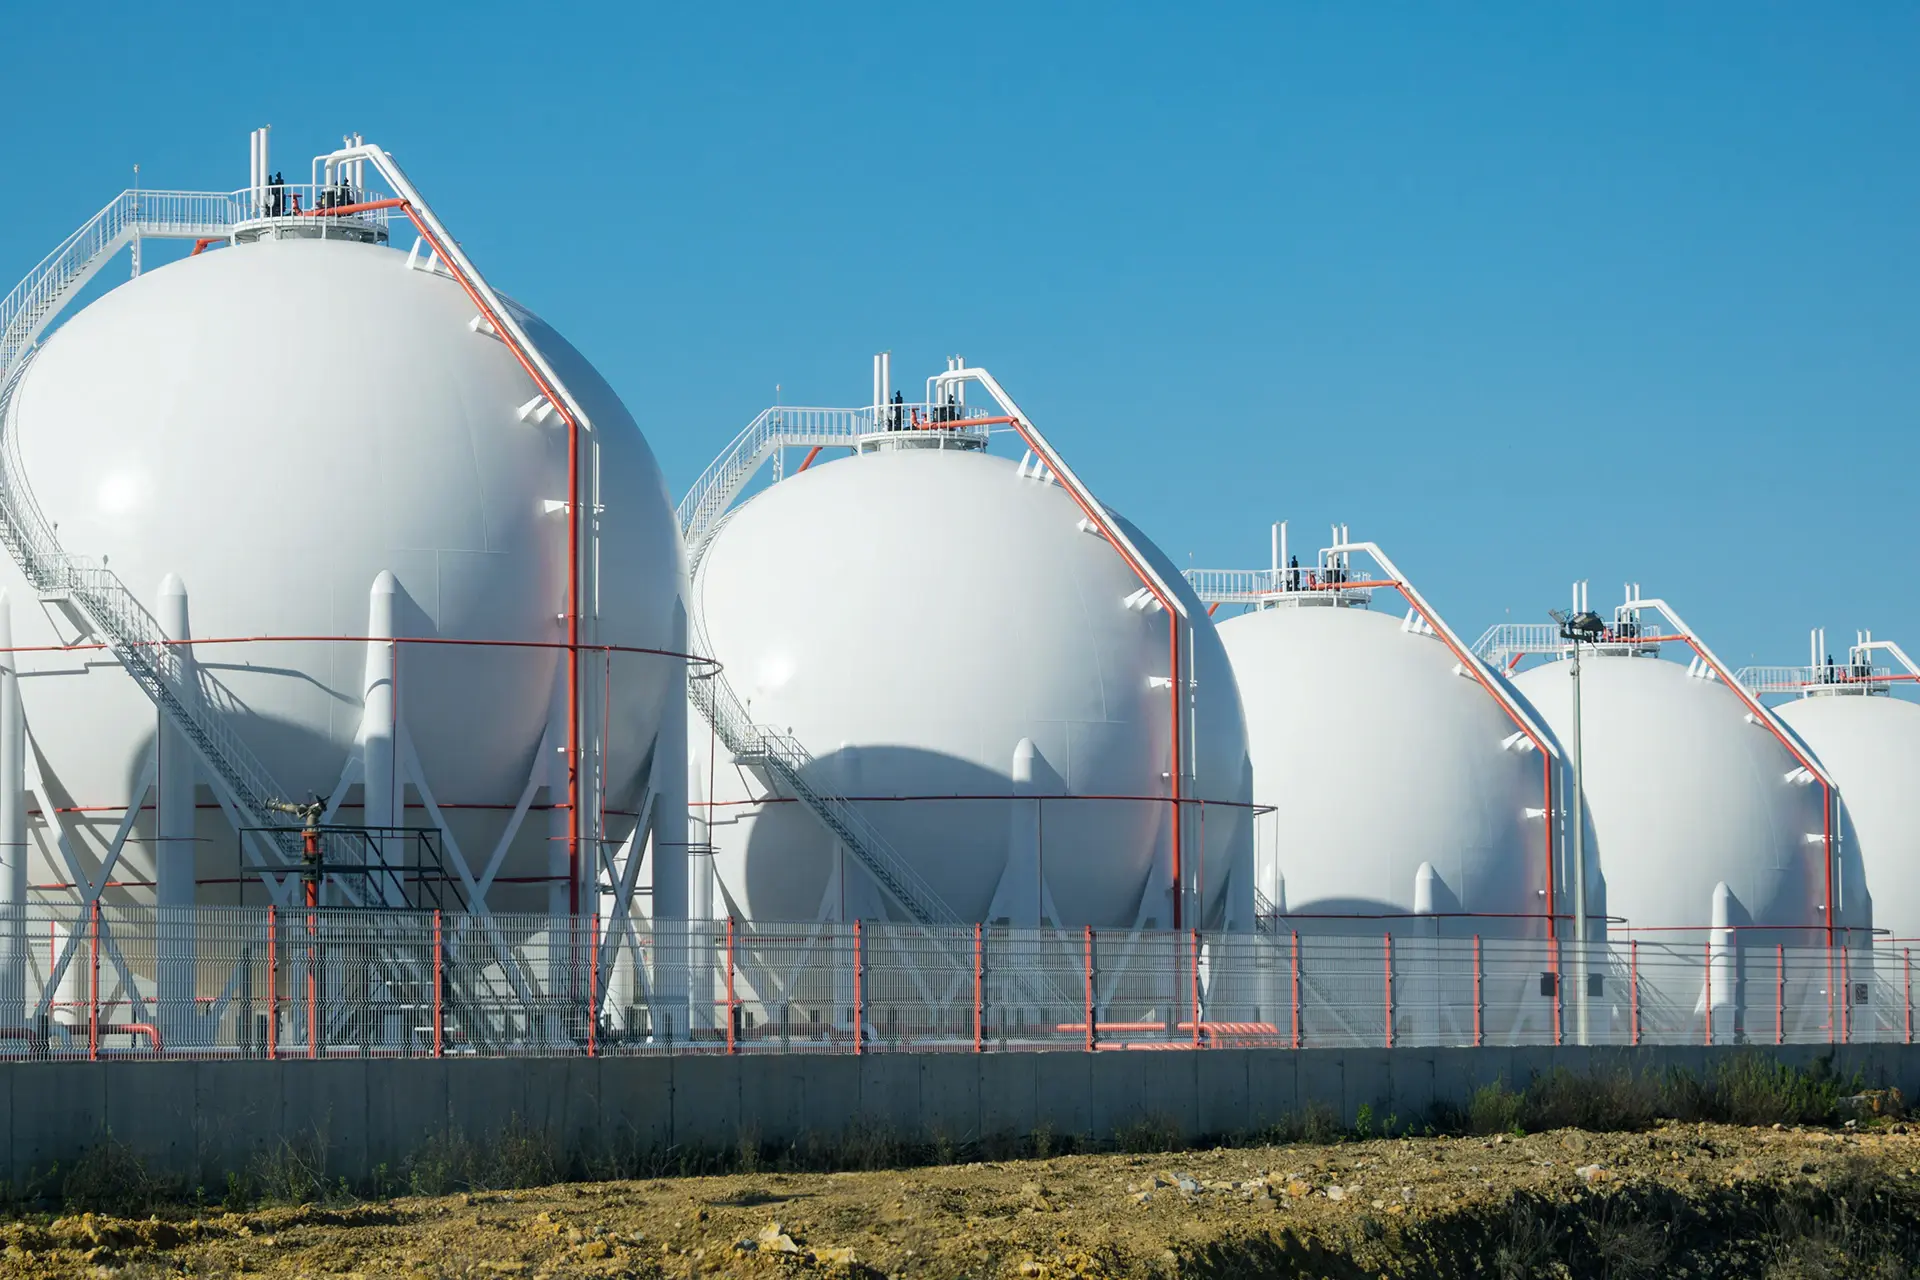 Five LNG tanks in a row